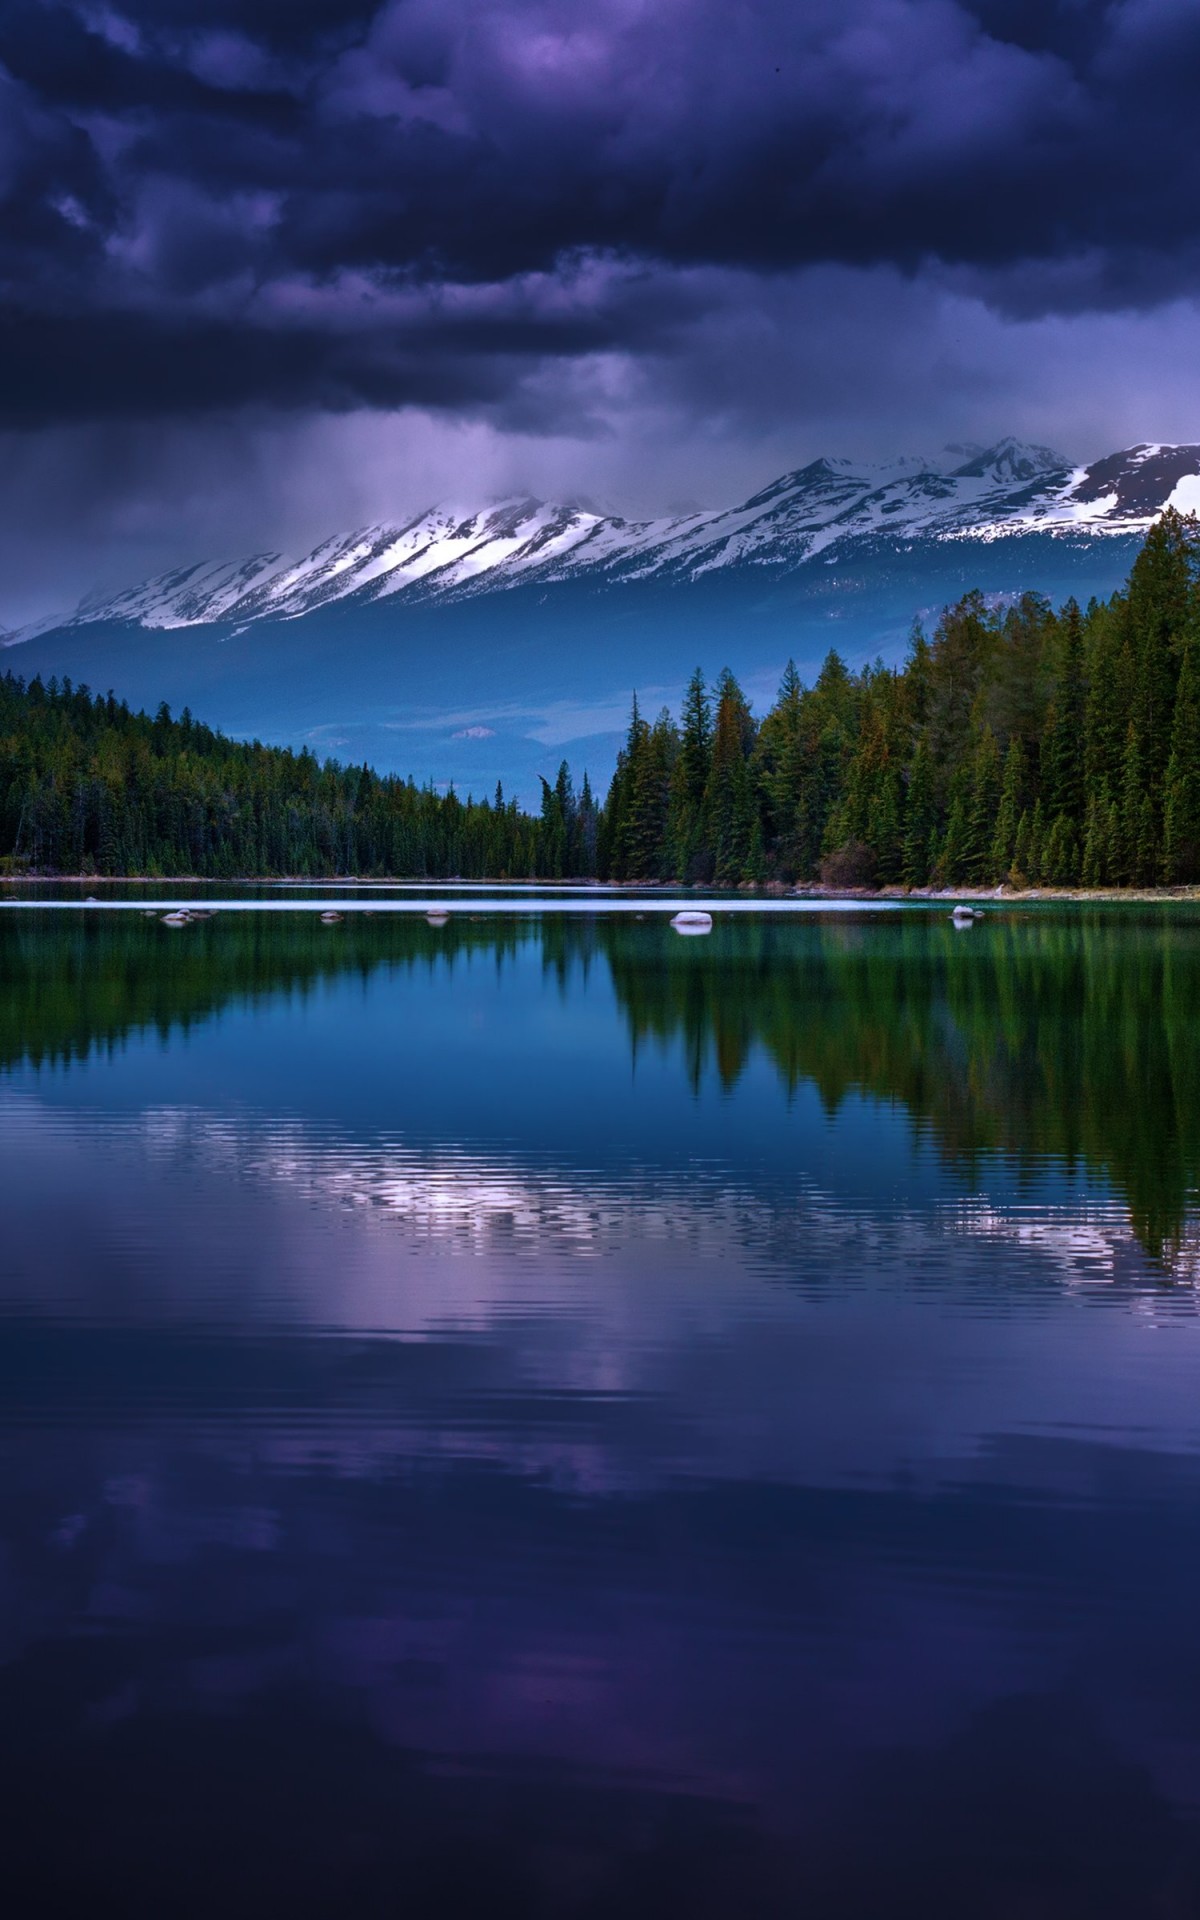 First Lake, Alberta, Canada Wallpaper for Amazon Kindle Fire HDX